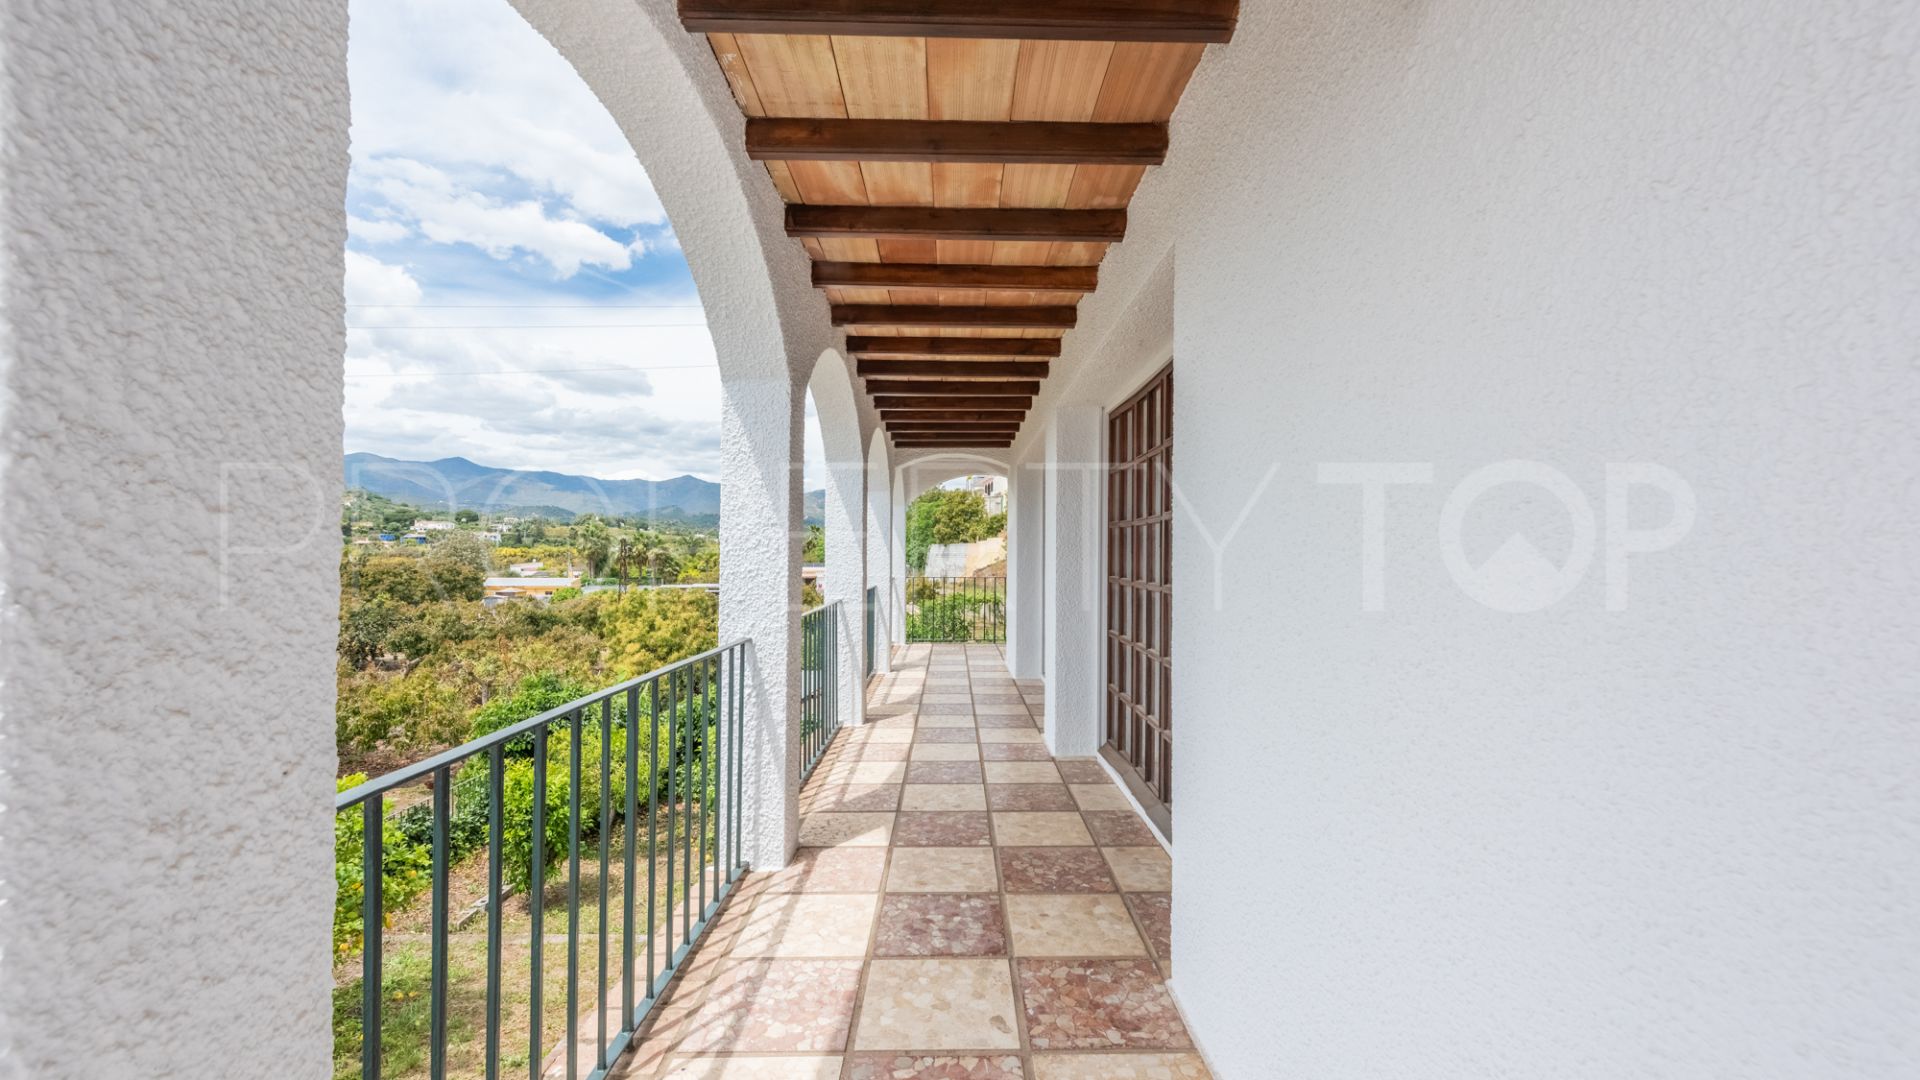 For sale villa in Estepona East with 5 bedrooms